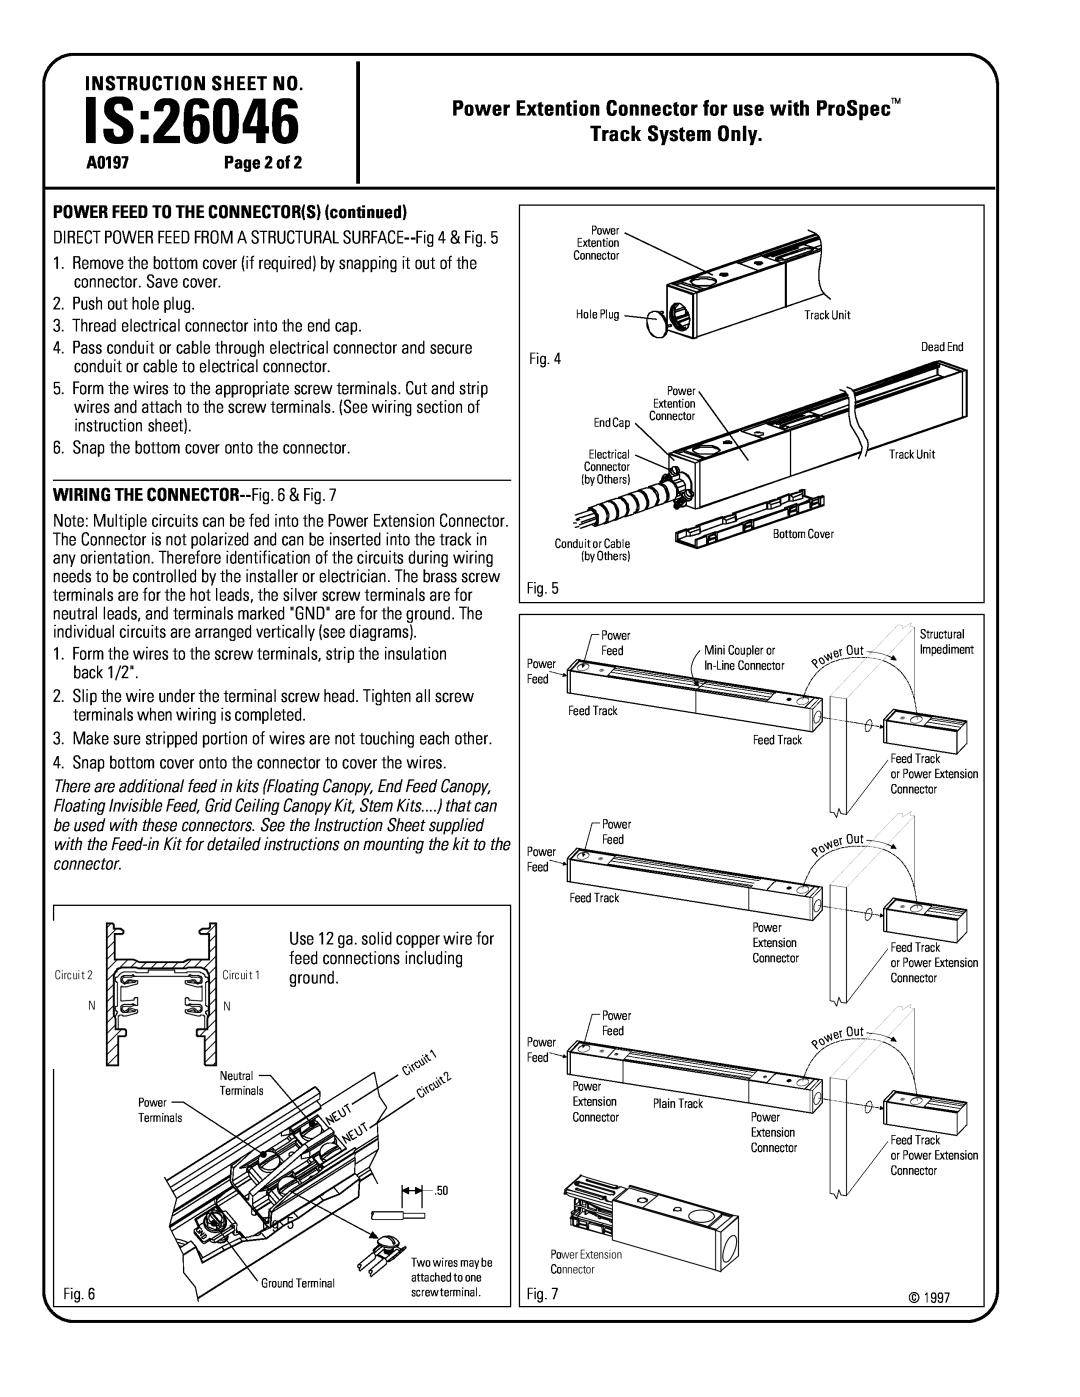 Lightolier 26046 Power Extention Connector for use with ProSpec, Track System Only, Is, Instruction Sheet No, A0197 